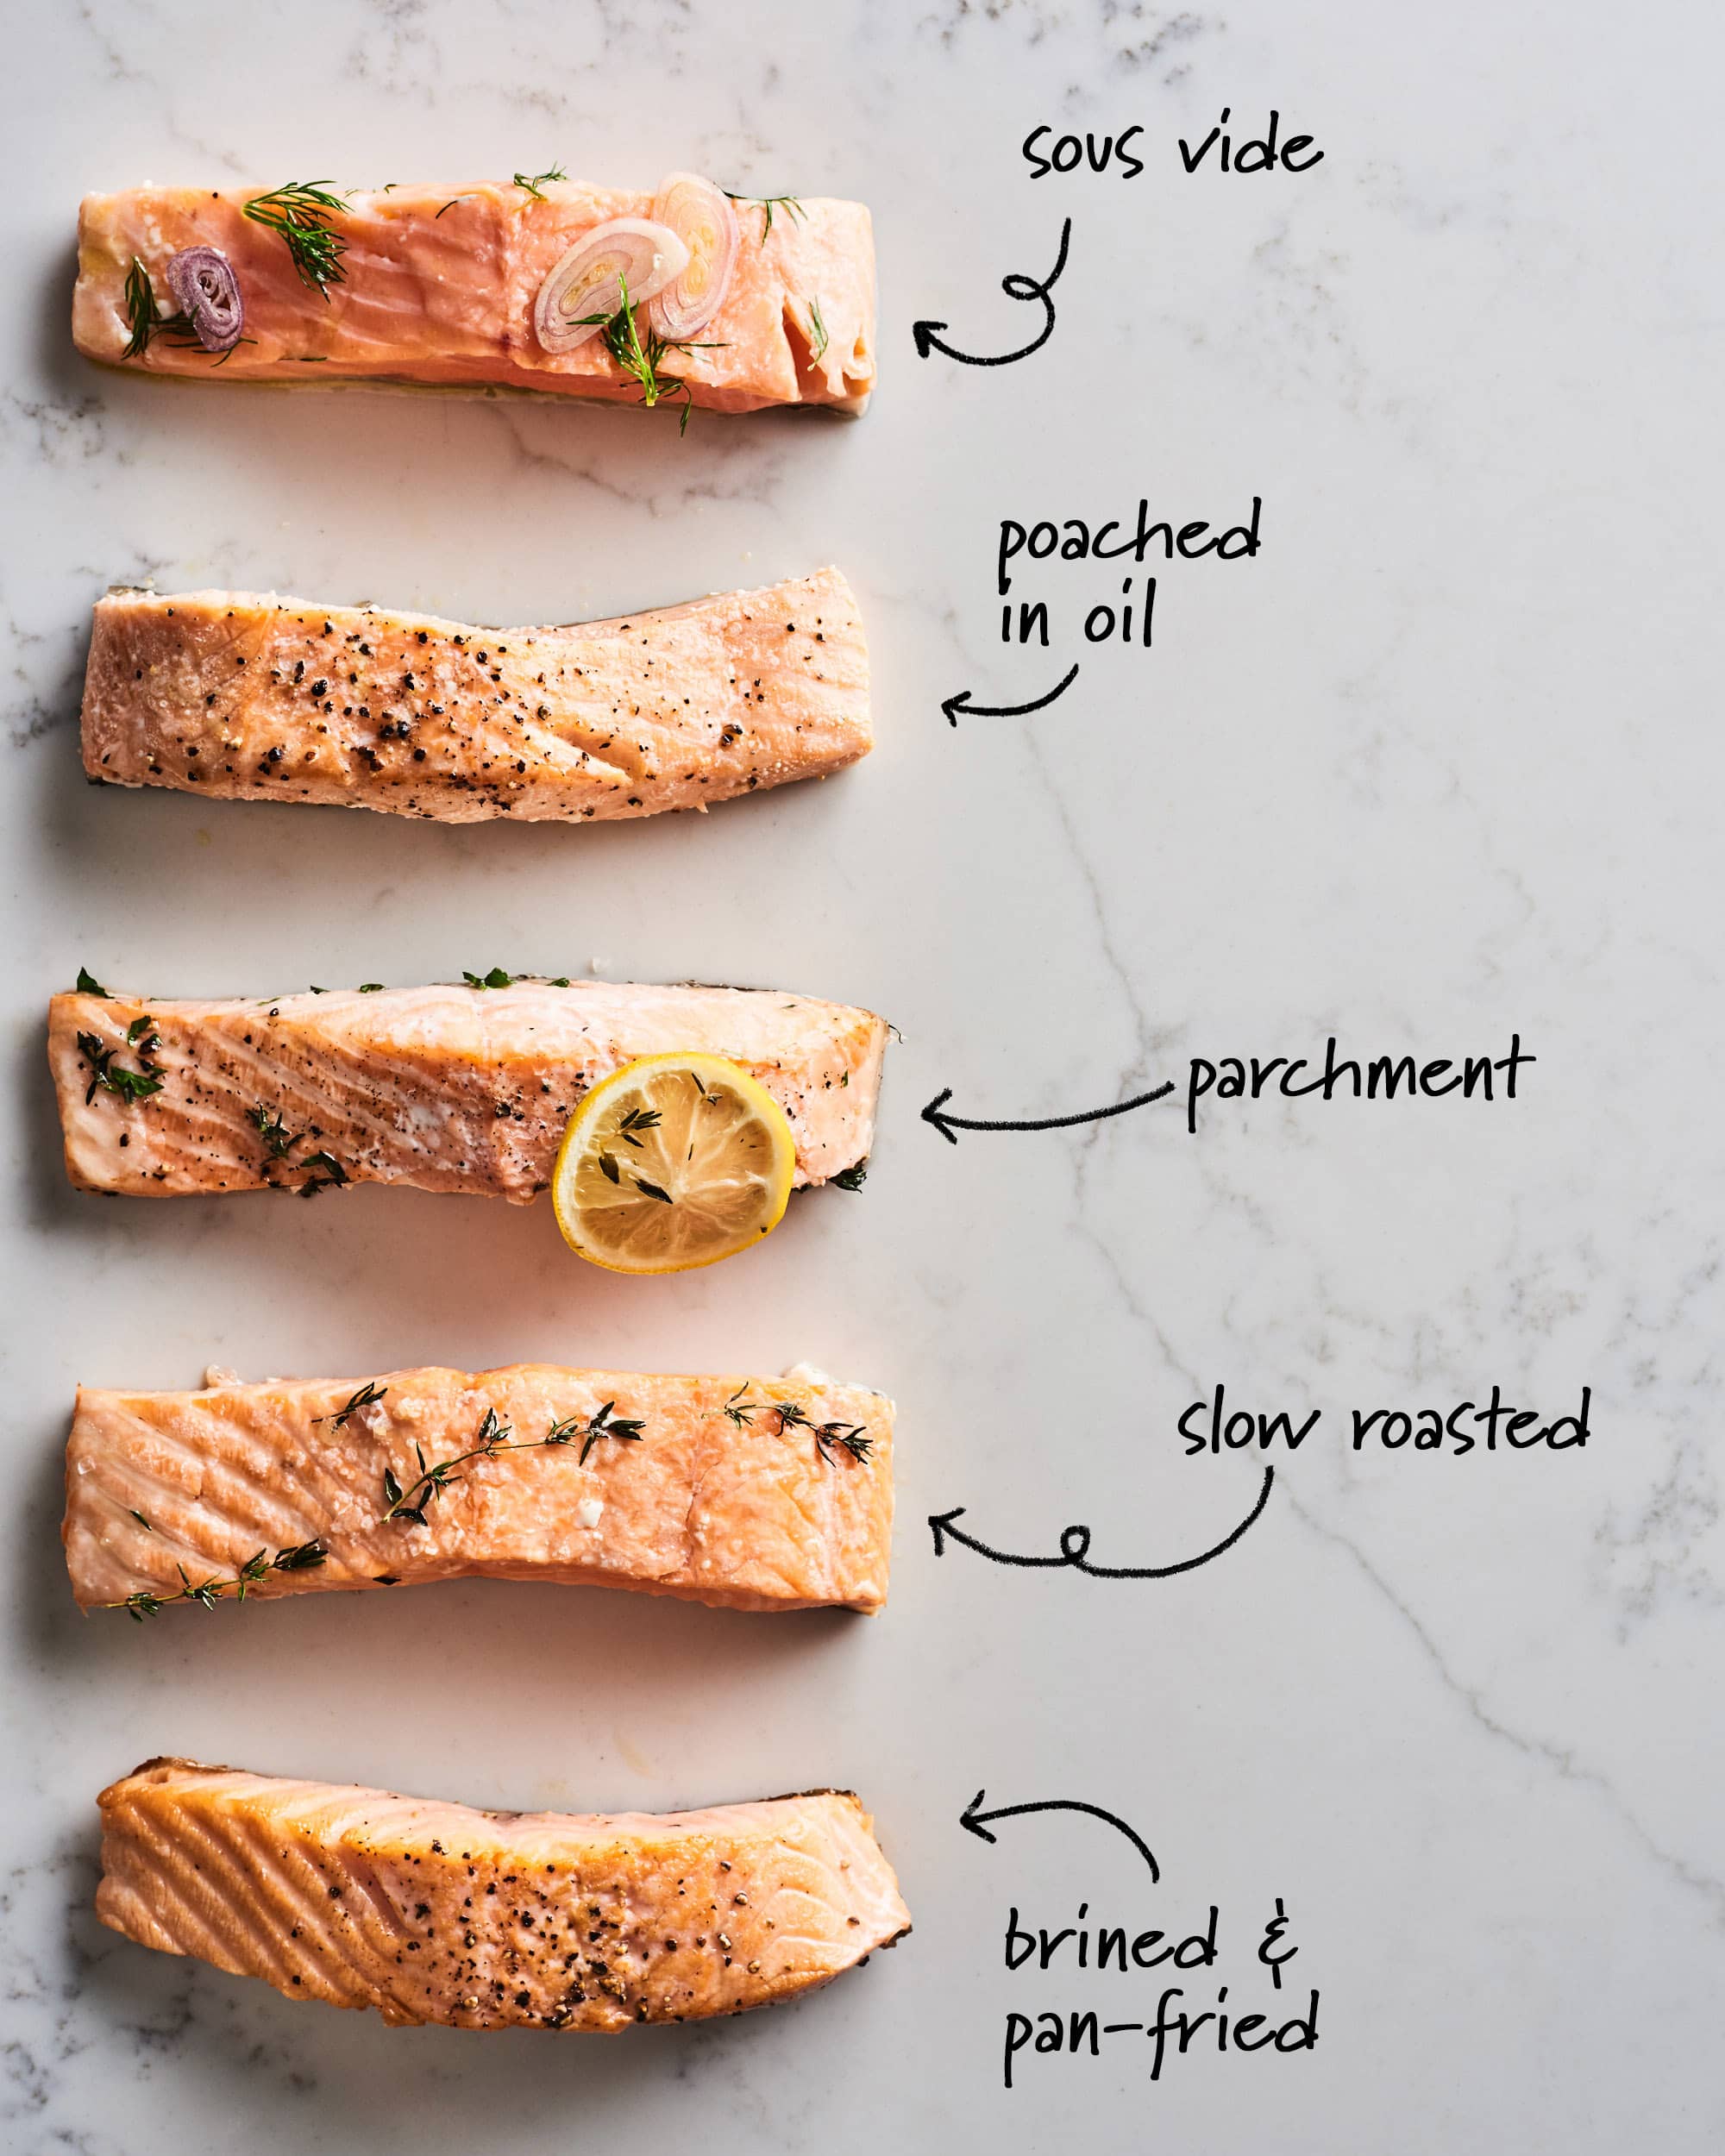 The Best Way to Cook Salmon - We Tested 5 Methods | Kitchn